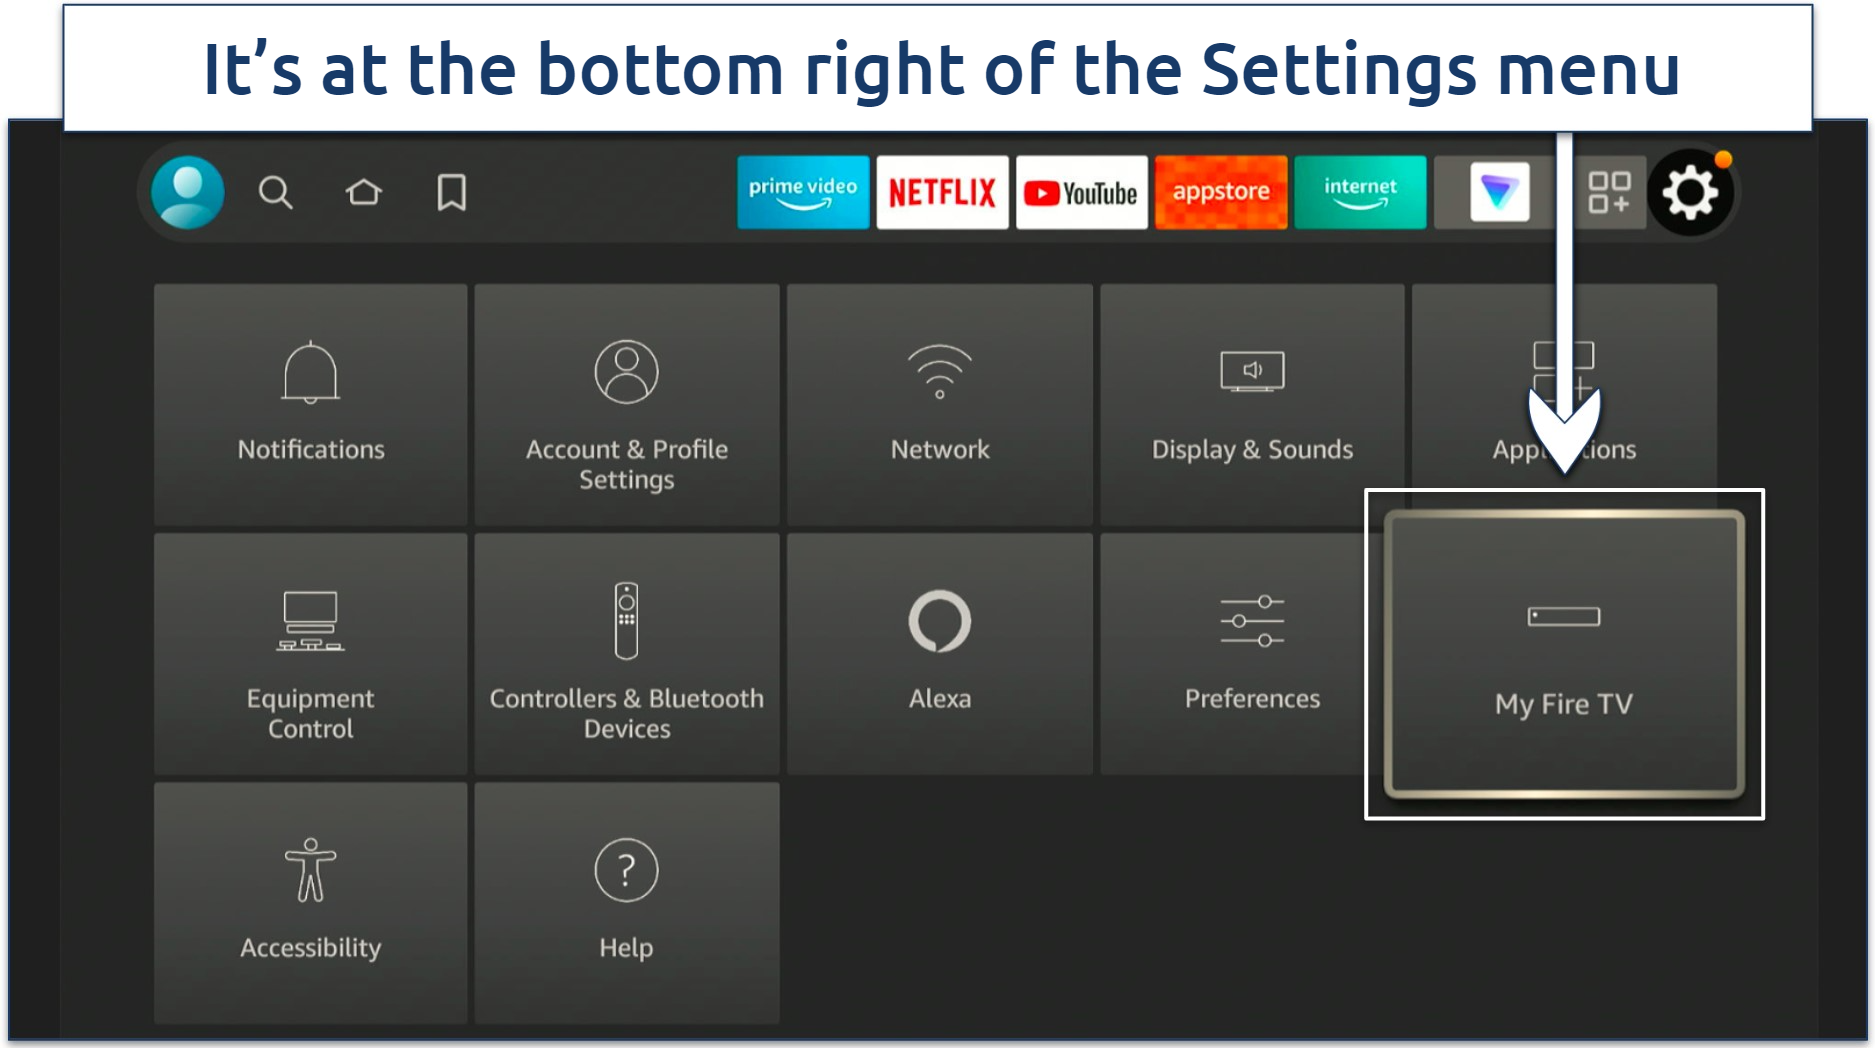 Fire TV Stick 3 and Fire TV Stick Lite can sideload apps like Kodi and run  Downloader